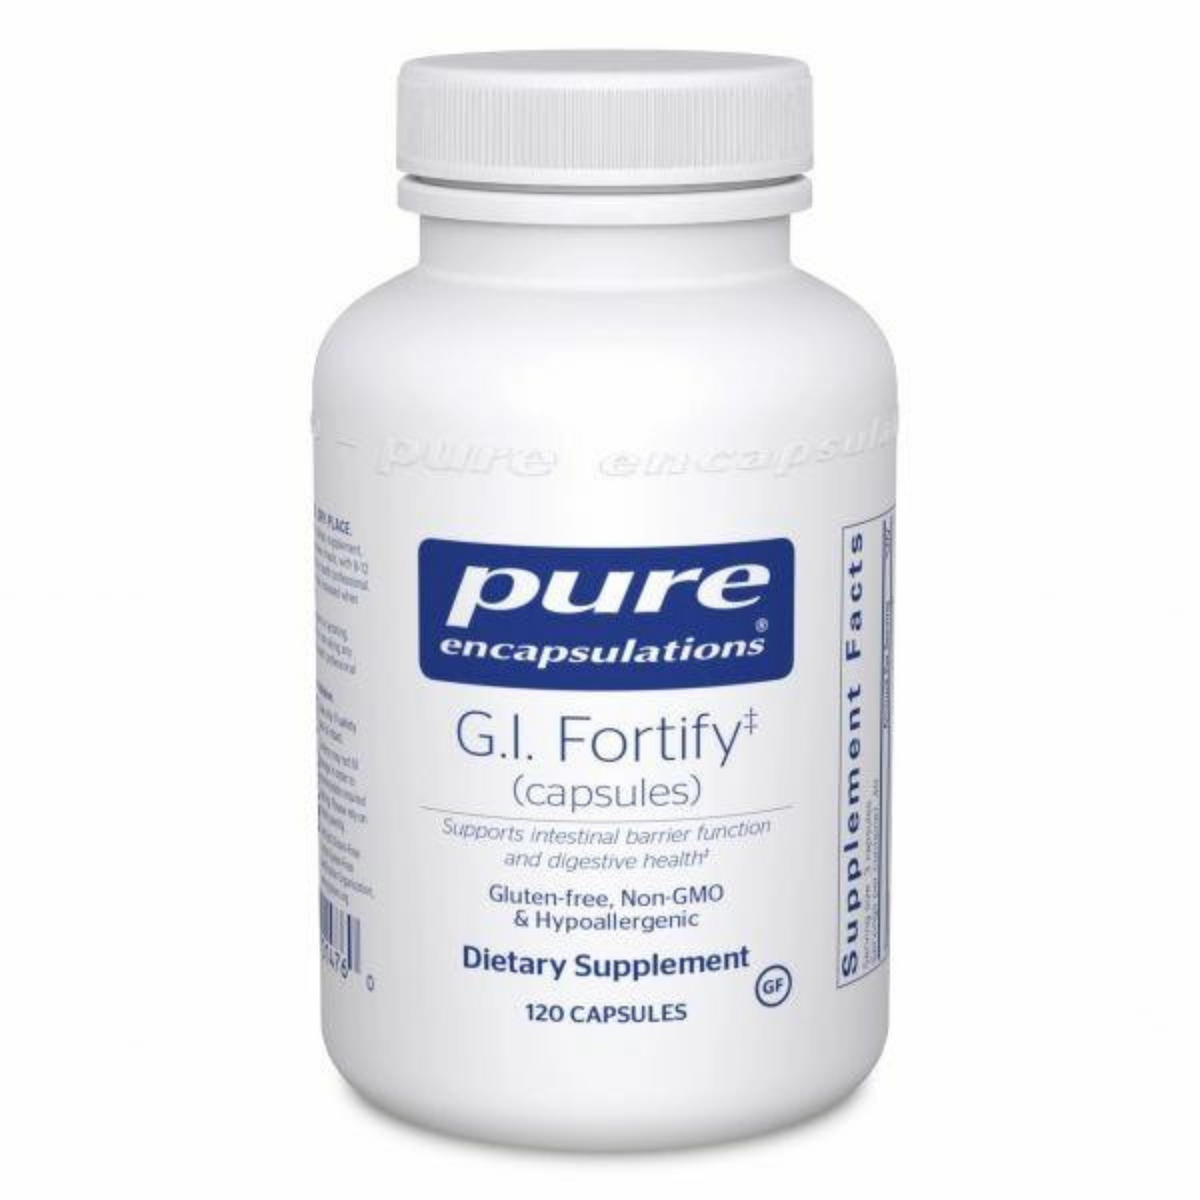 Primary Image of G.I. Fortify Capsules (120 count)